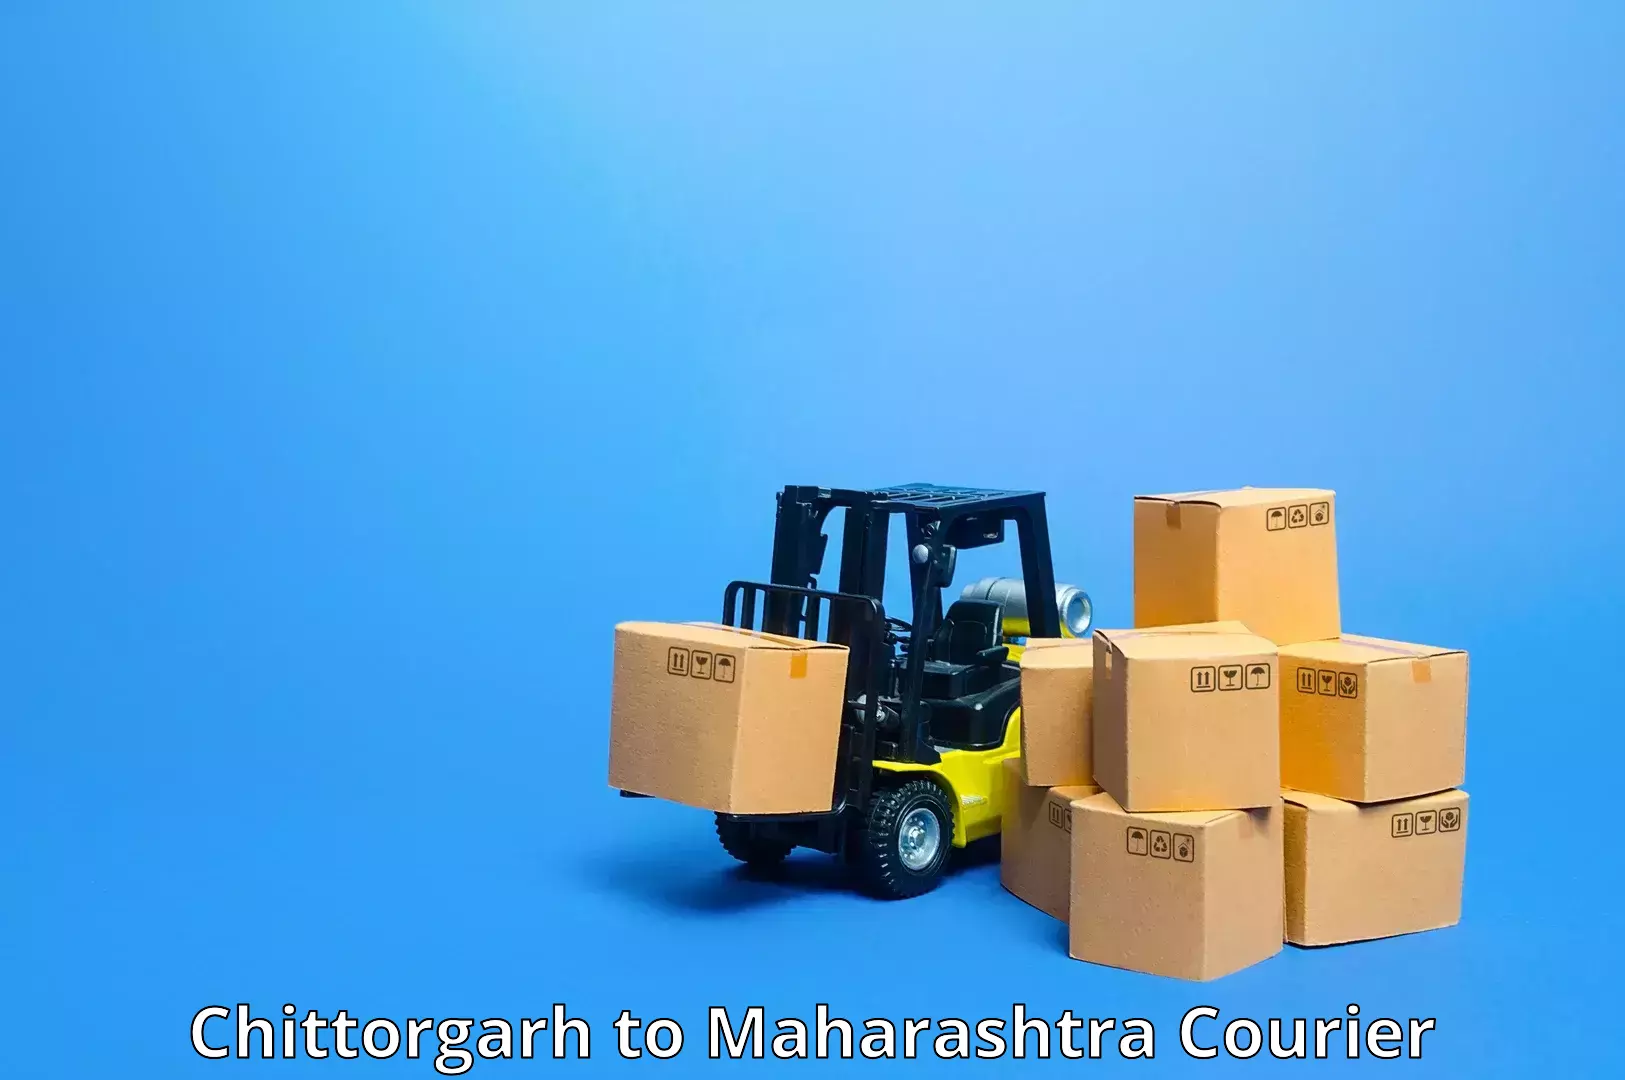 Express delivery capabilities Chittorgarh to Vaduj